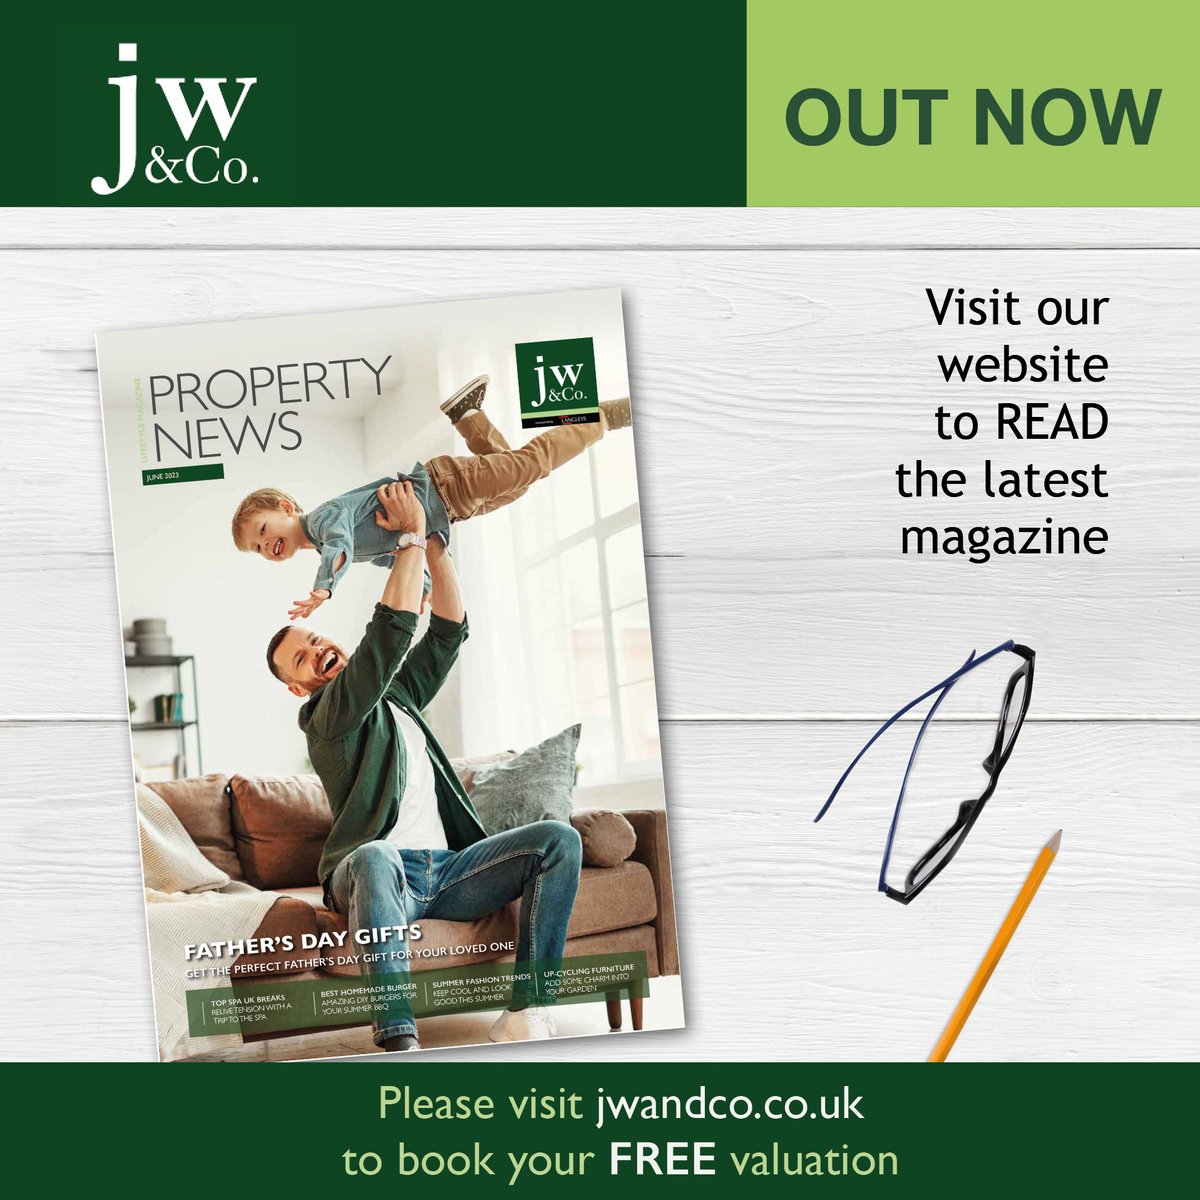 Our June magazine is out now! Click the link below to read your digital copy!
#June #Magazine #EstateAgentsUK

issuu.com/thepropertycol…